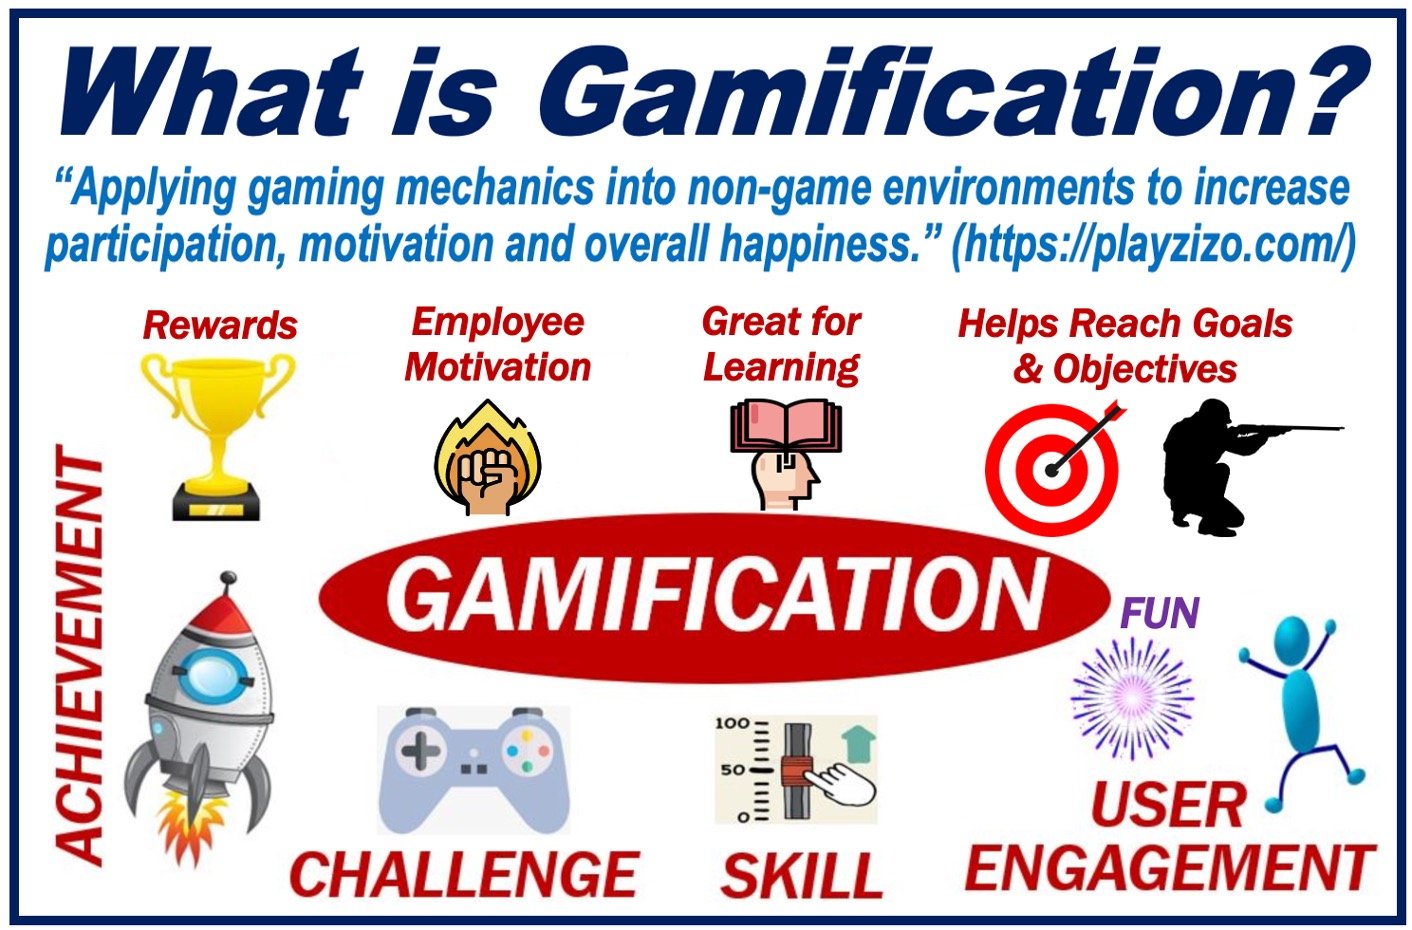 Call Center Gamification Improves Customer Service - Image